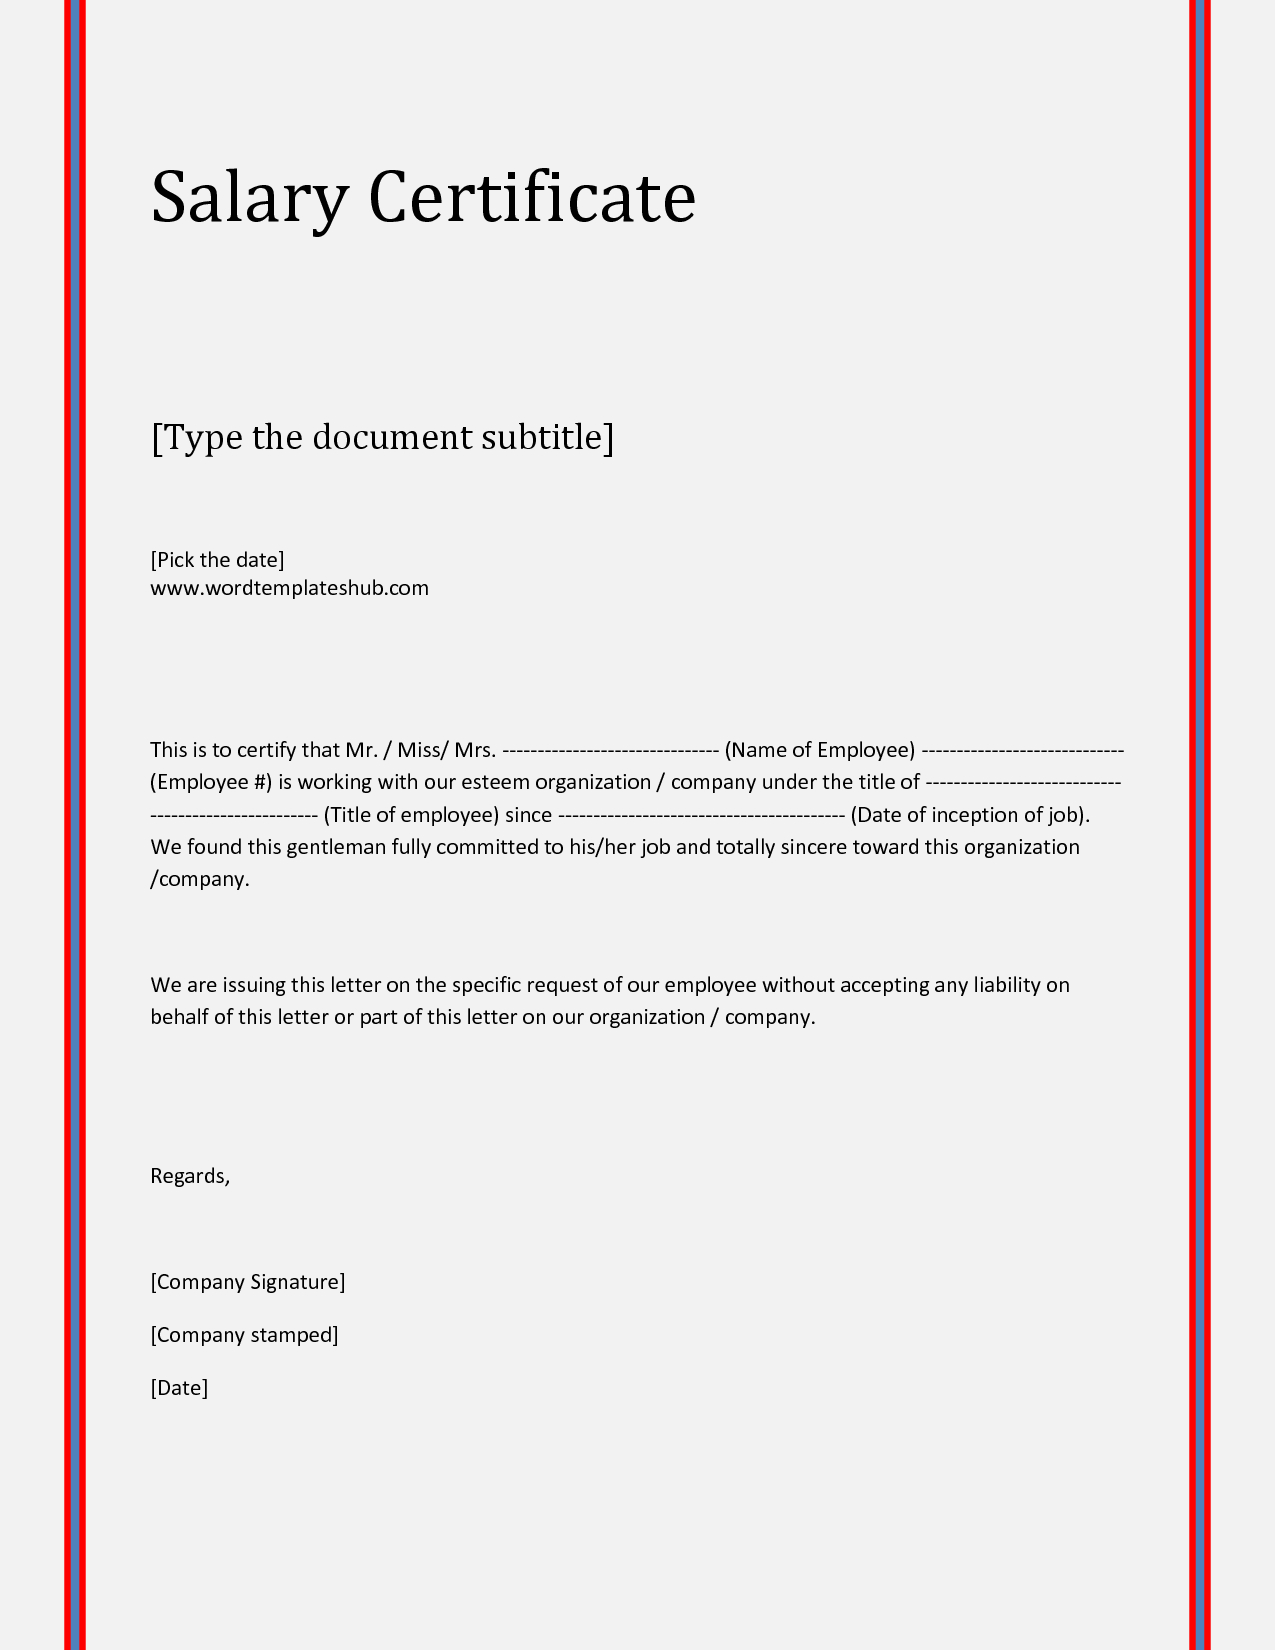 Request Letter For Certificate Employment Nurses Cover Proof In Sample Certificate Employment Template